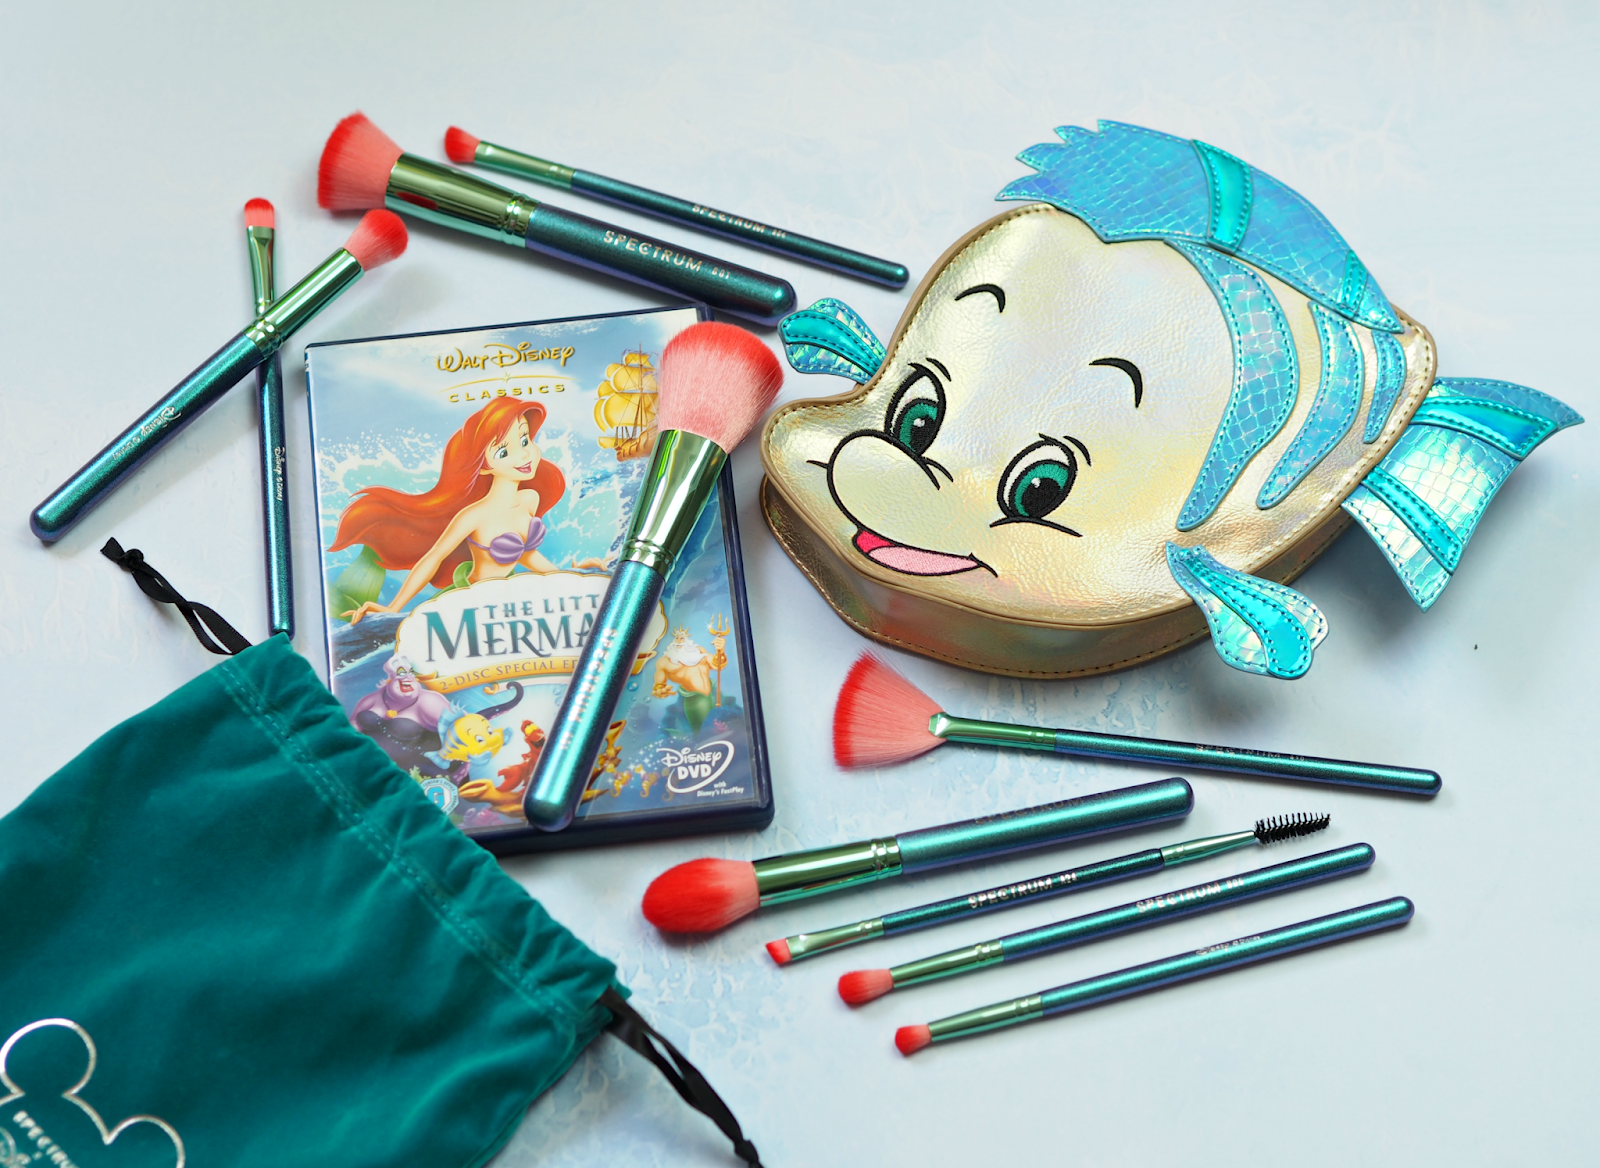 Under The Sea: Spectrum Brushes Launch 'The Little Mermaid' Collection